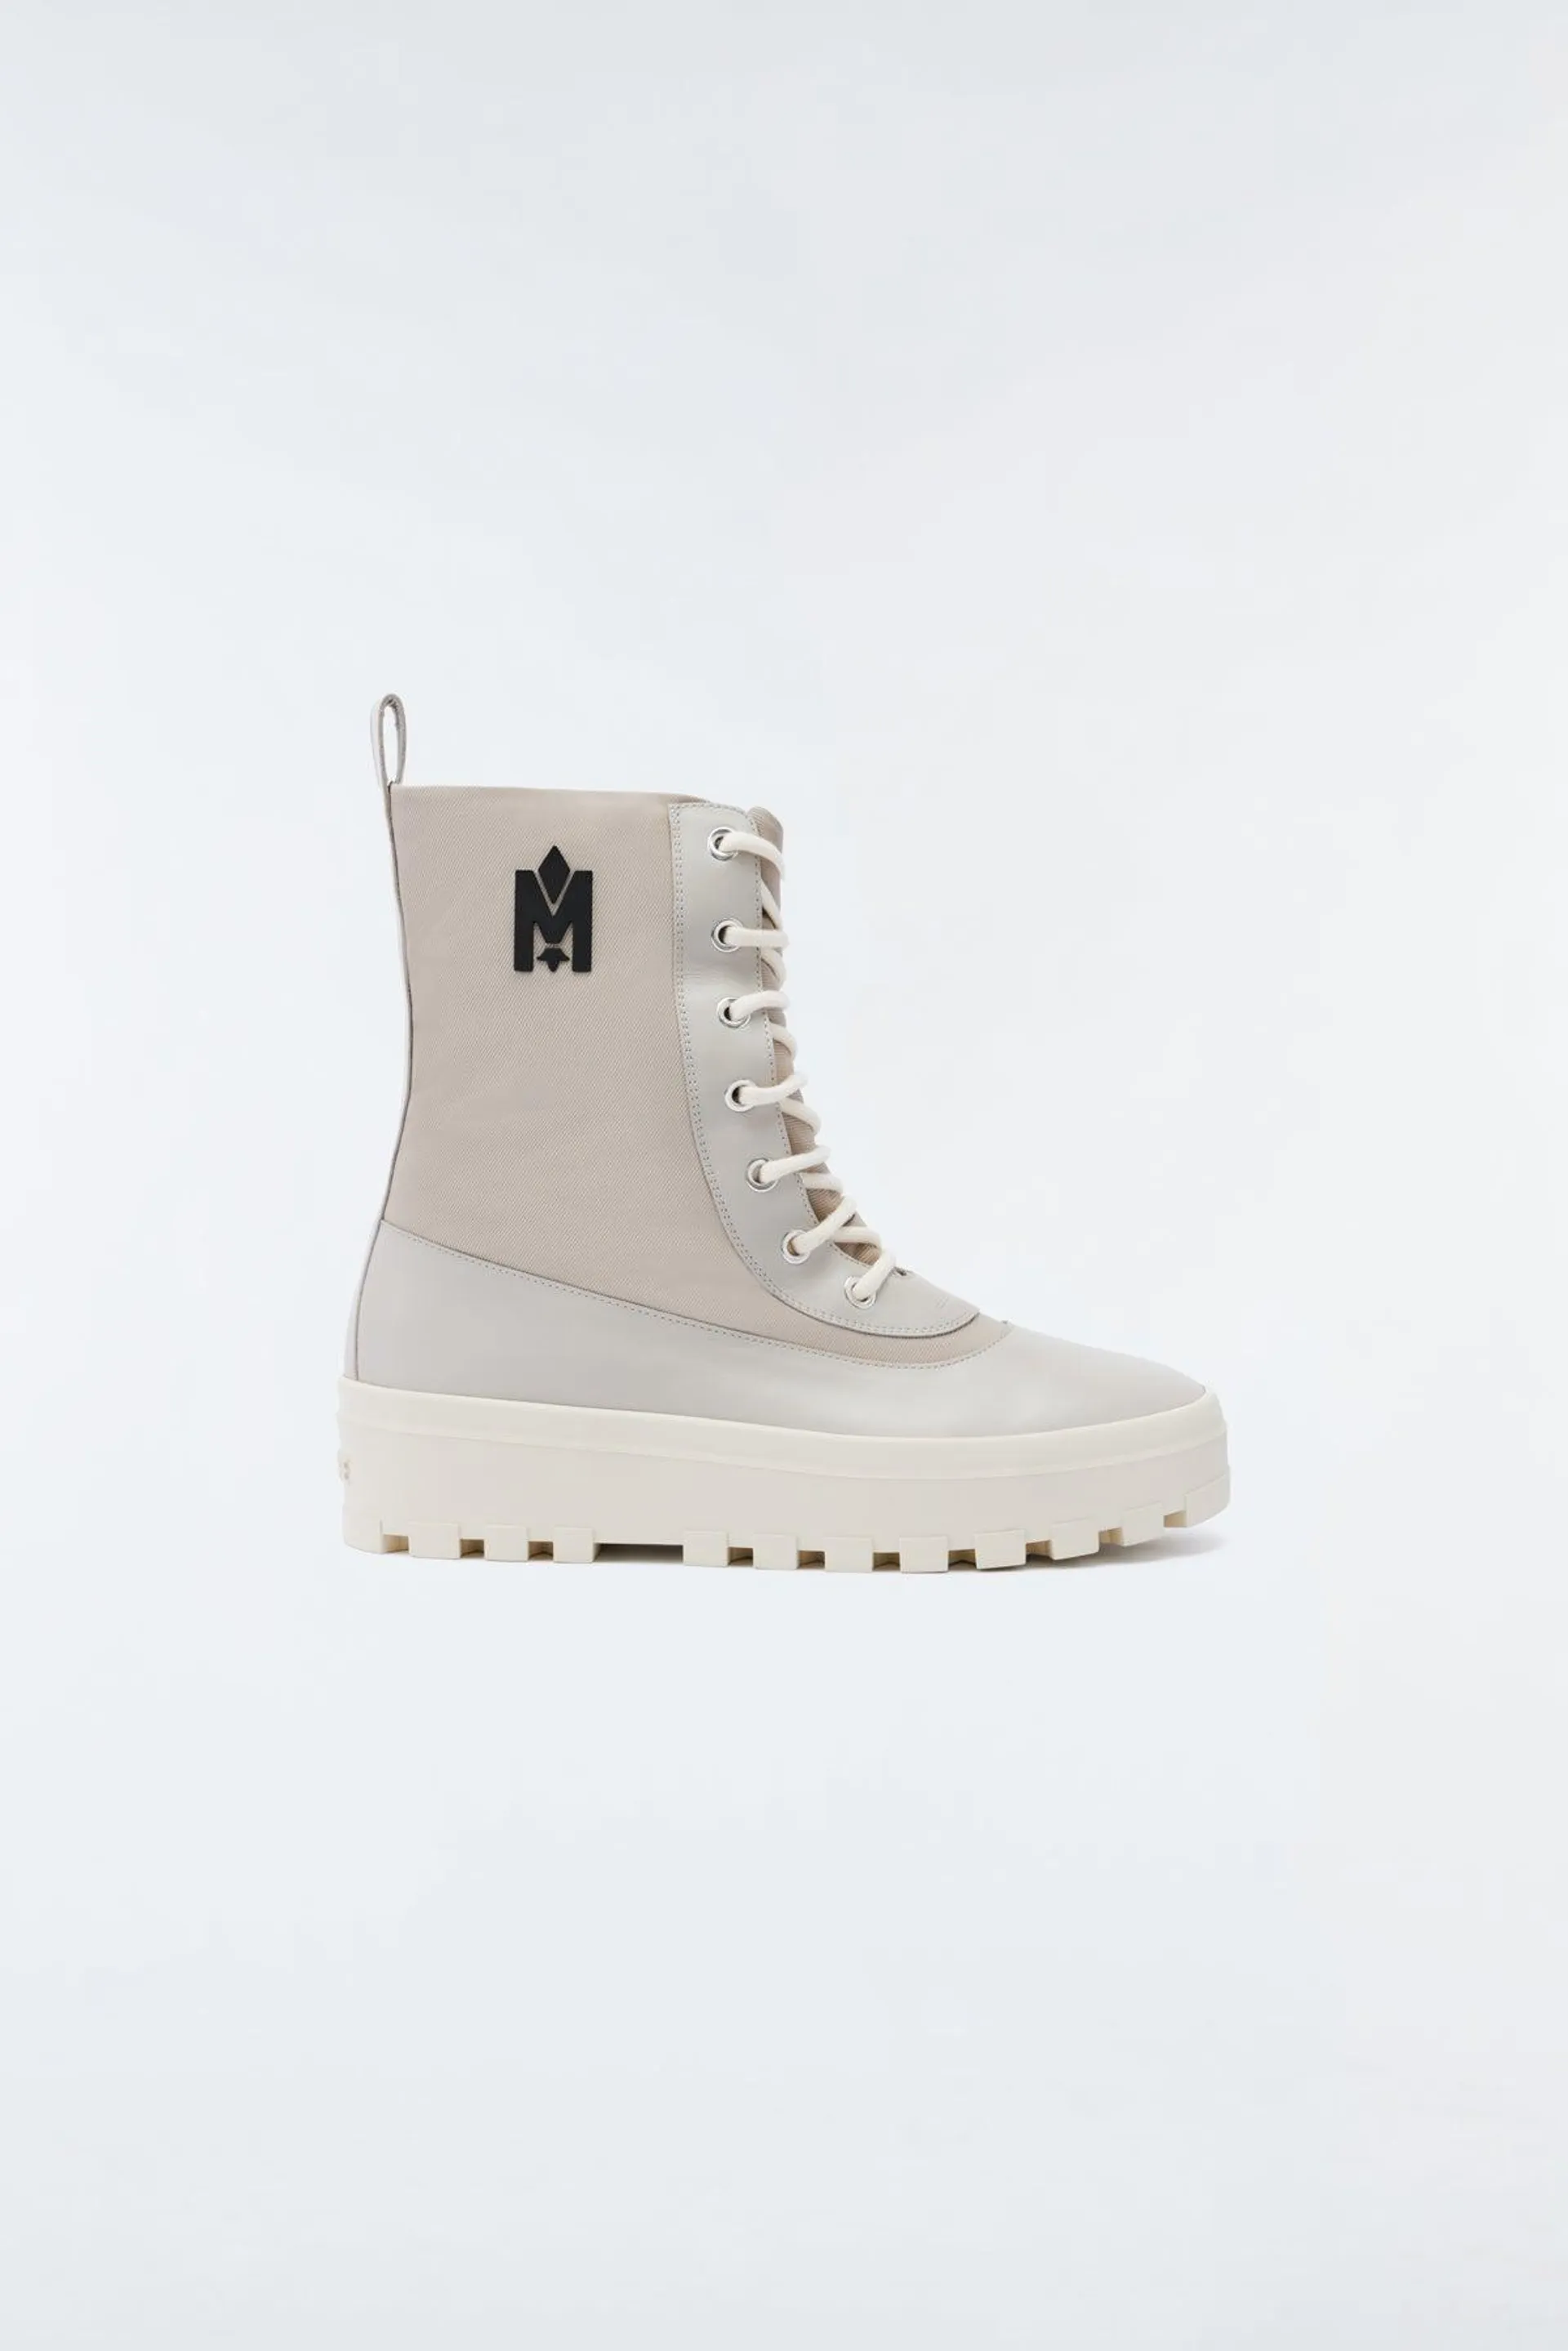 HERO unlined winter boot with Mackage signature lug tread sole for women